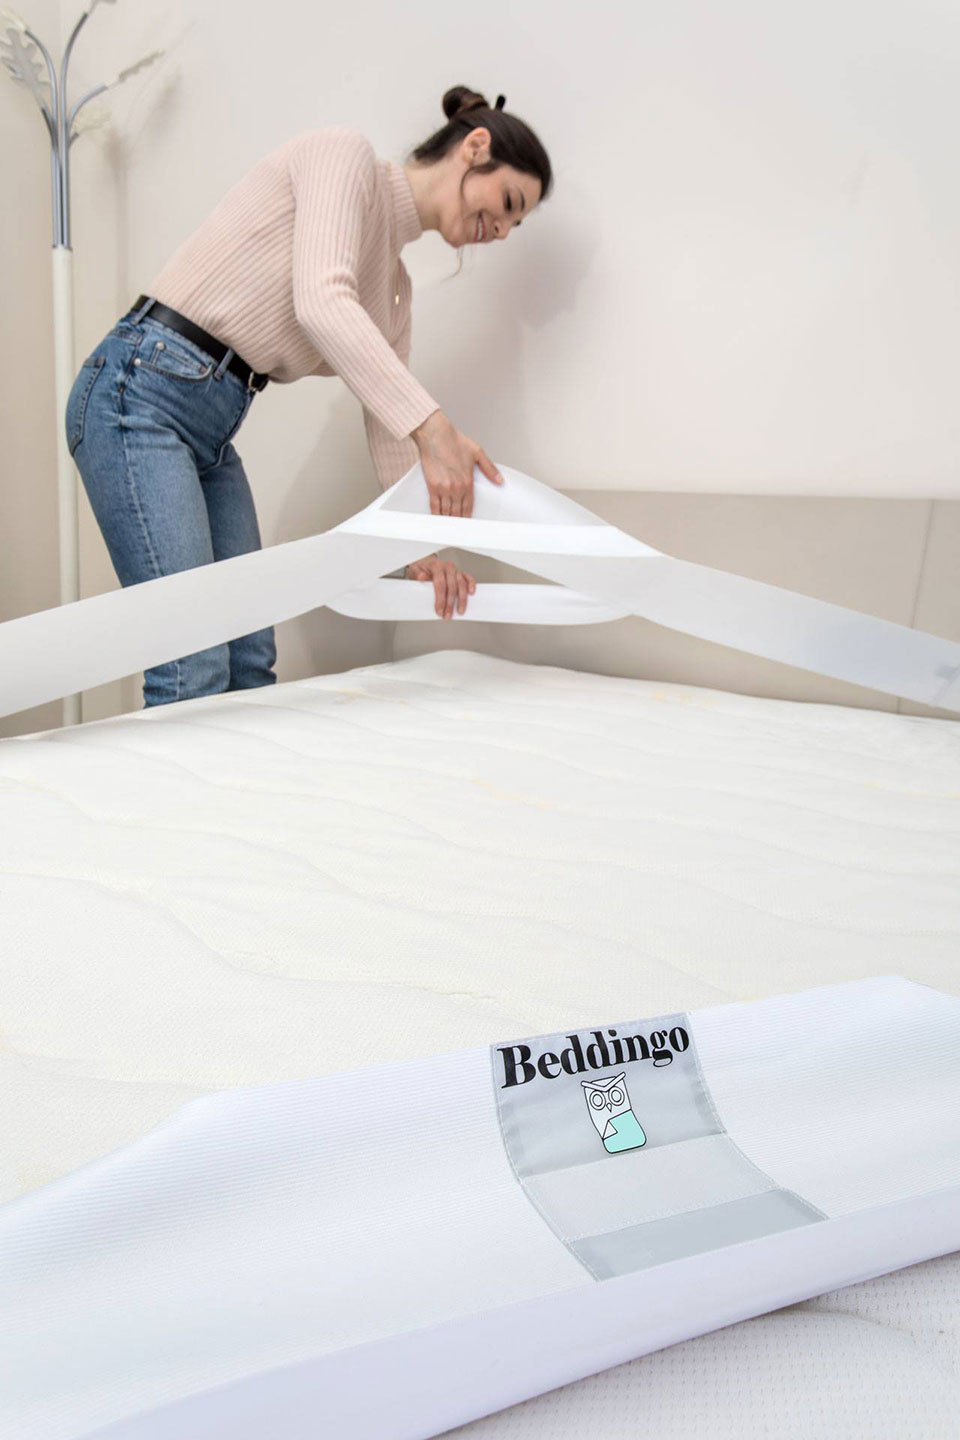 Beddingo Bed Sheets Stay Tucked, Fitted, and Free of Wrinkles How To Get A Fitted Sheet To Stay On